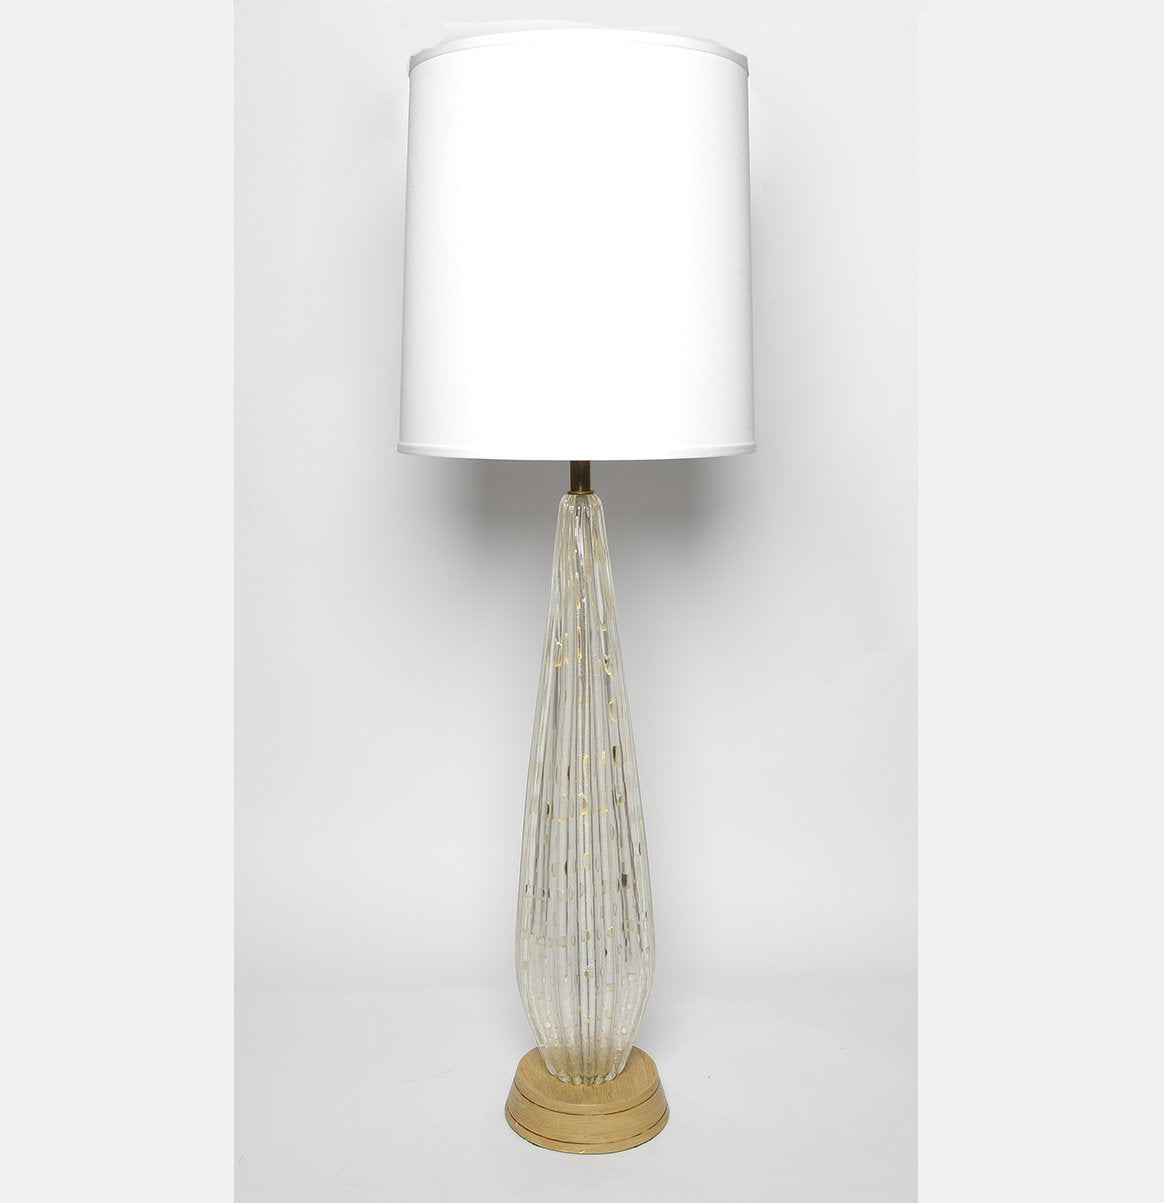 Speckled Murano Glass Table Lamp with Wooden Base